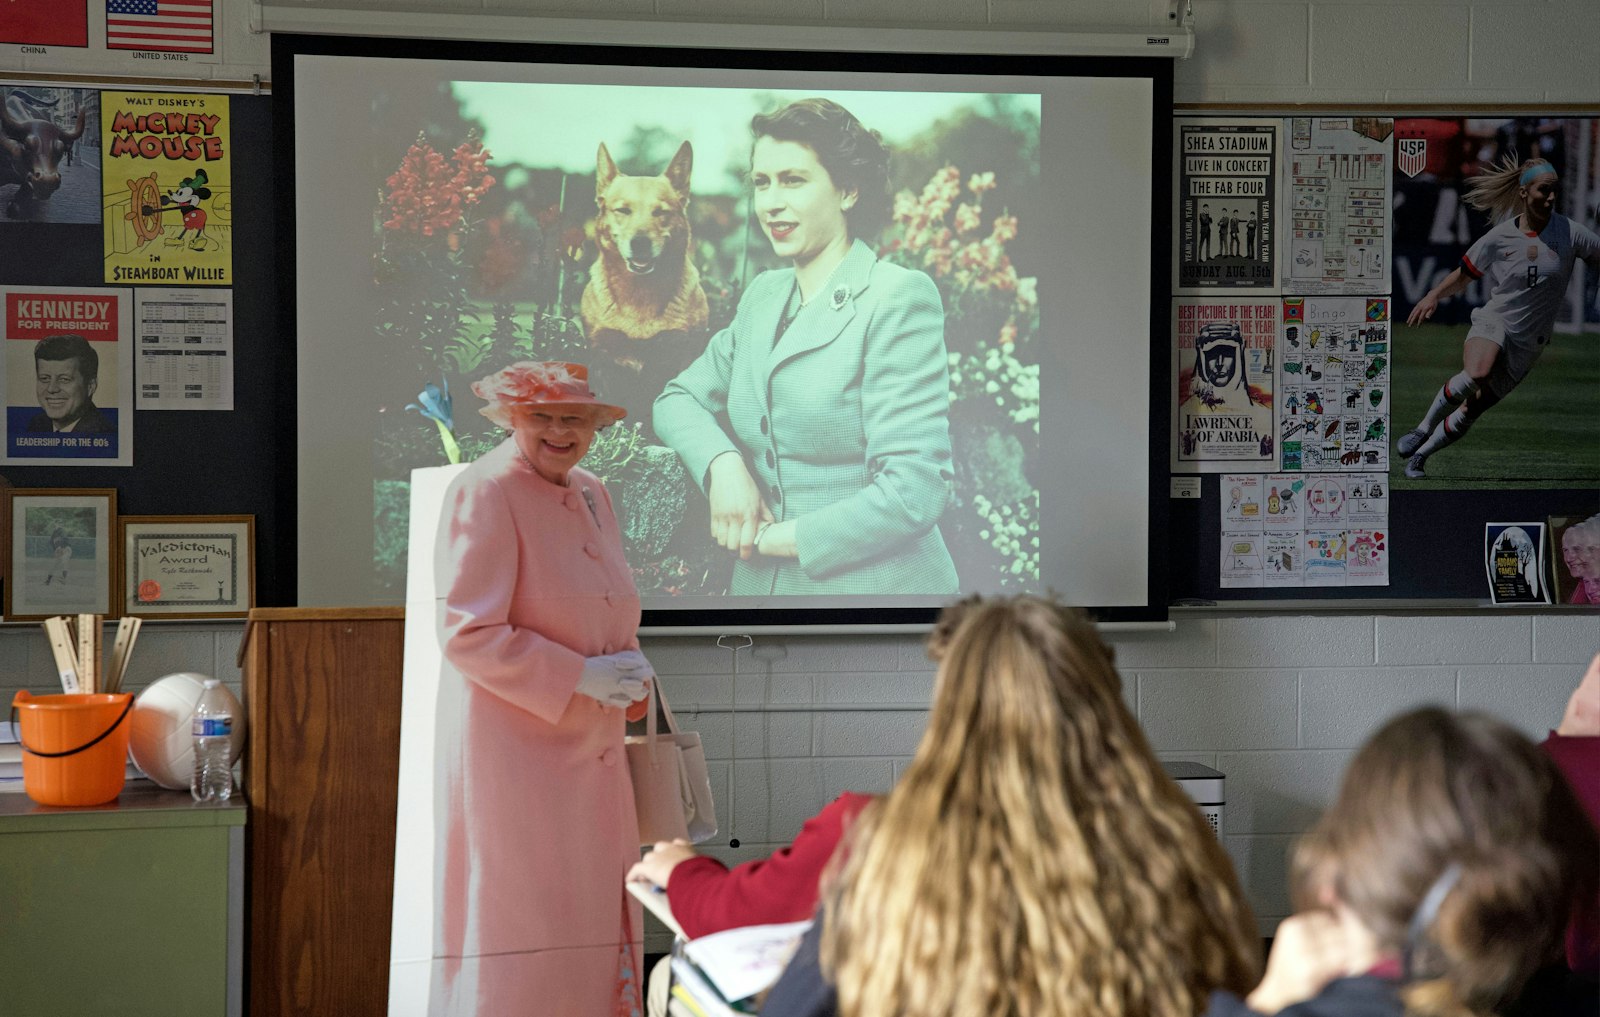 Rutkowski teaches a lesson on Queen Elizabeth II's reign. He said it will be strange not having Queen Elizabeth as the reigning British monarch, but her presence will continue to rule his classroom.